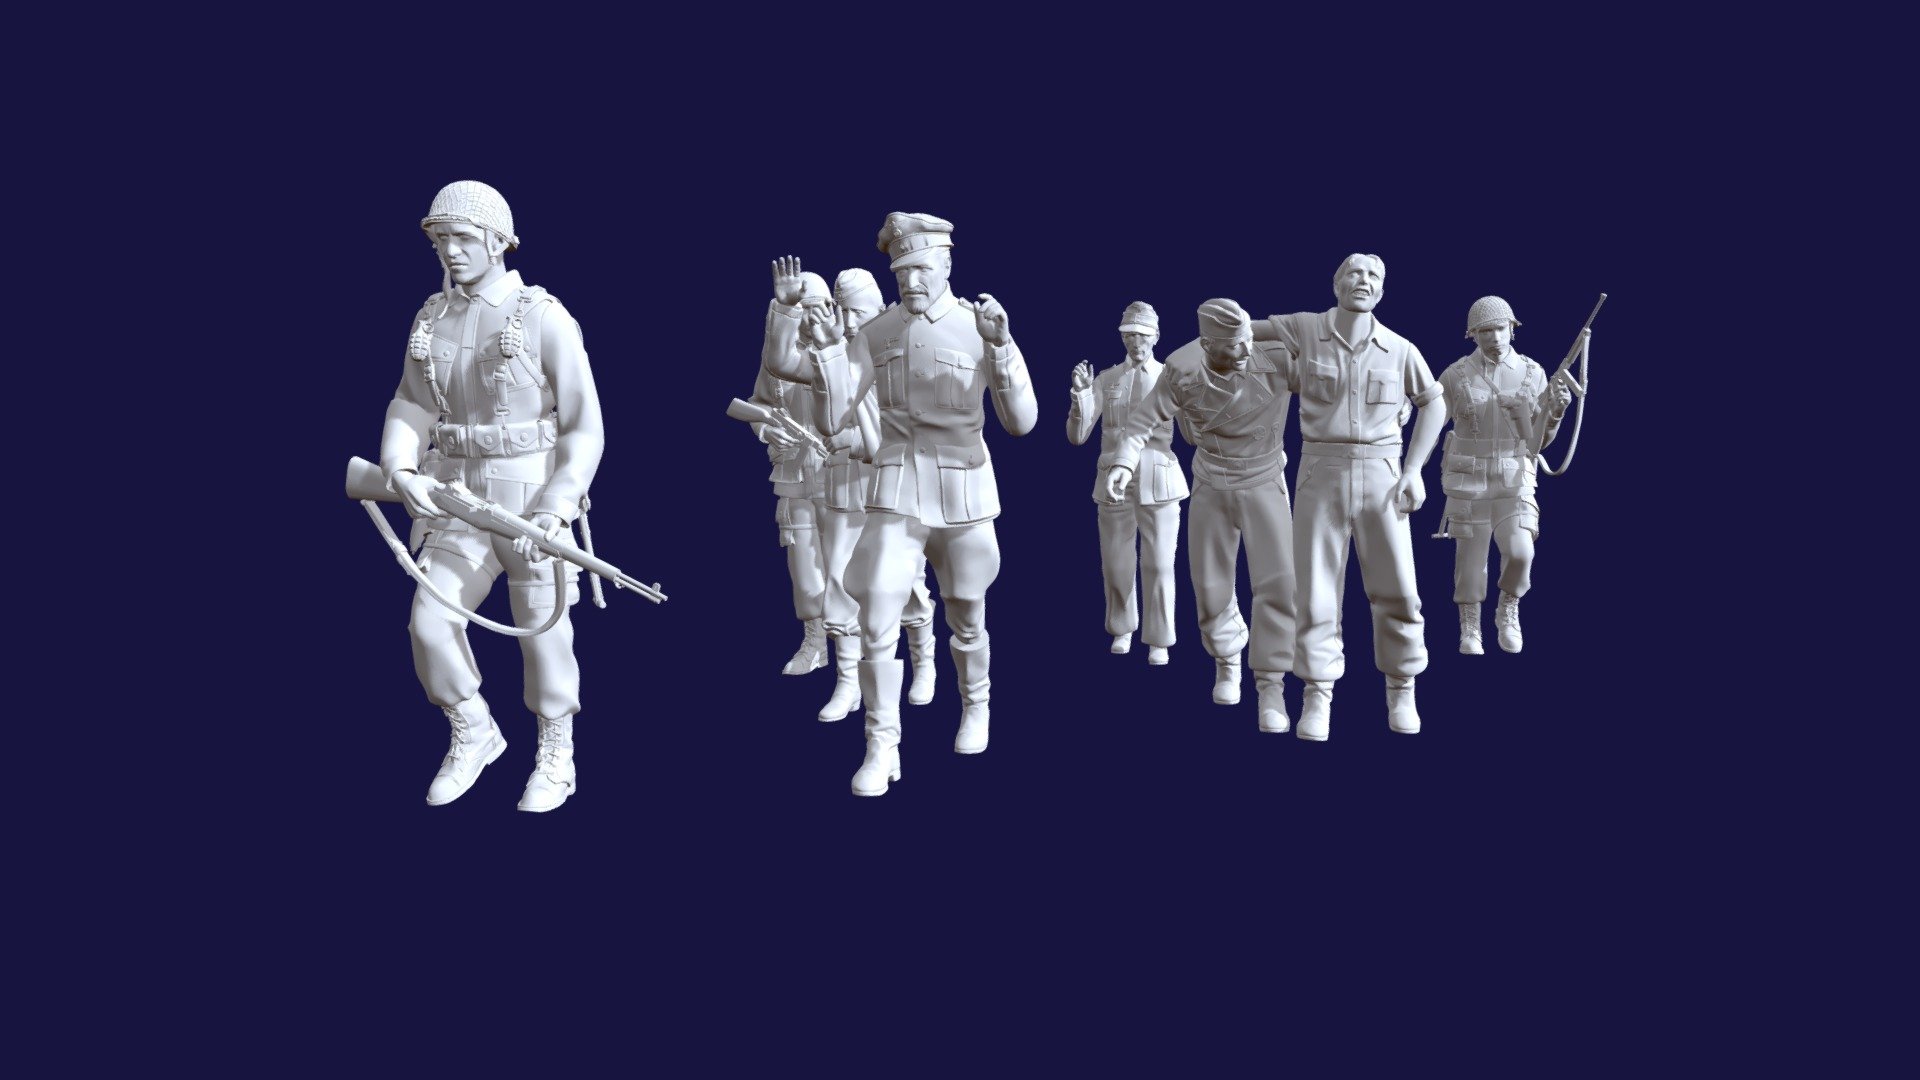 The format is OBJ, STL. Model for printing on a 3d printer. Scale 16 - USA SOLDIERS AND CAPTURED - Buy Royalty Free 3D model by explorertit36@gmail.com (@paydi) 3d model